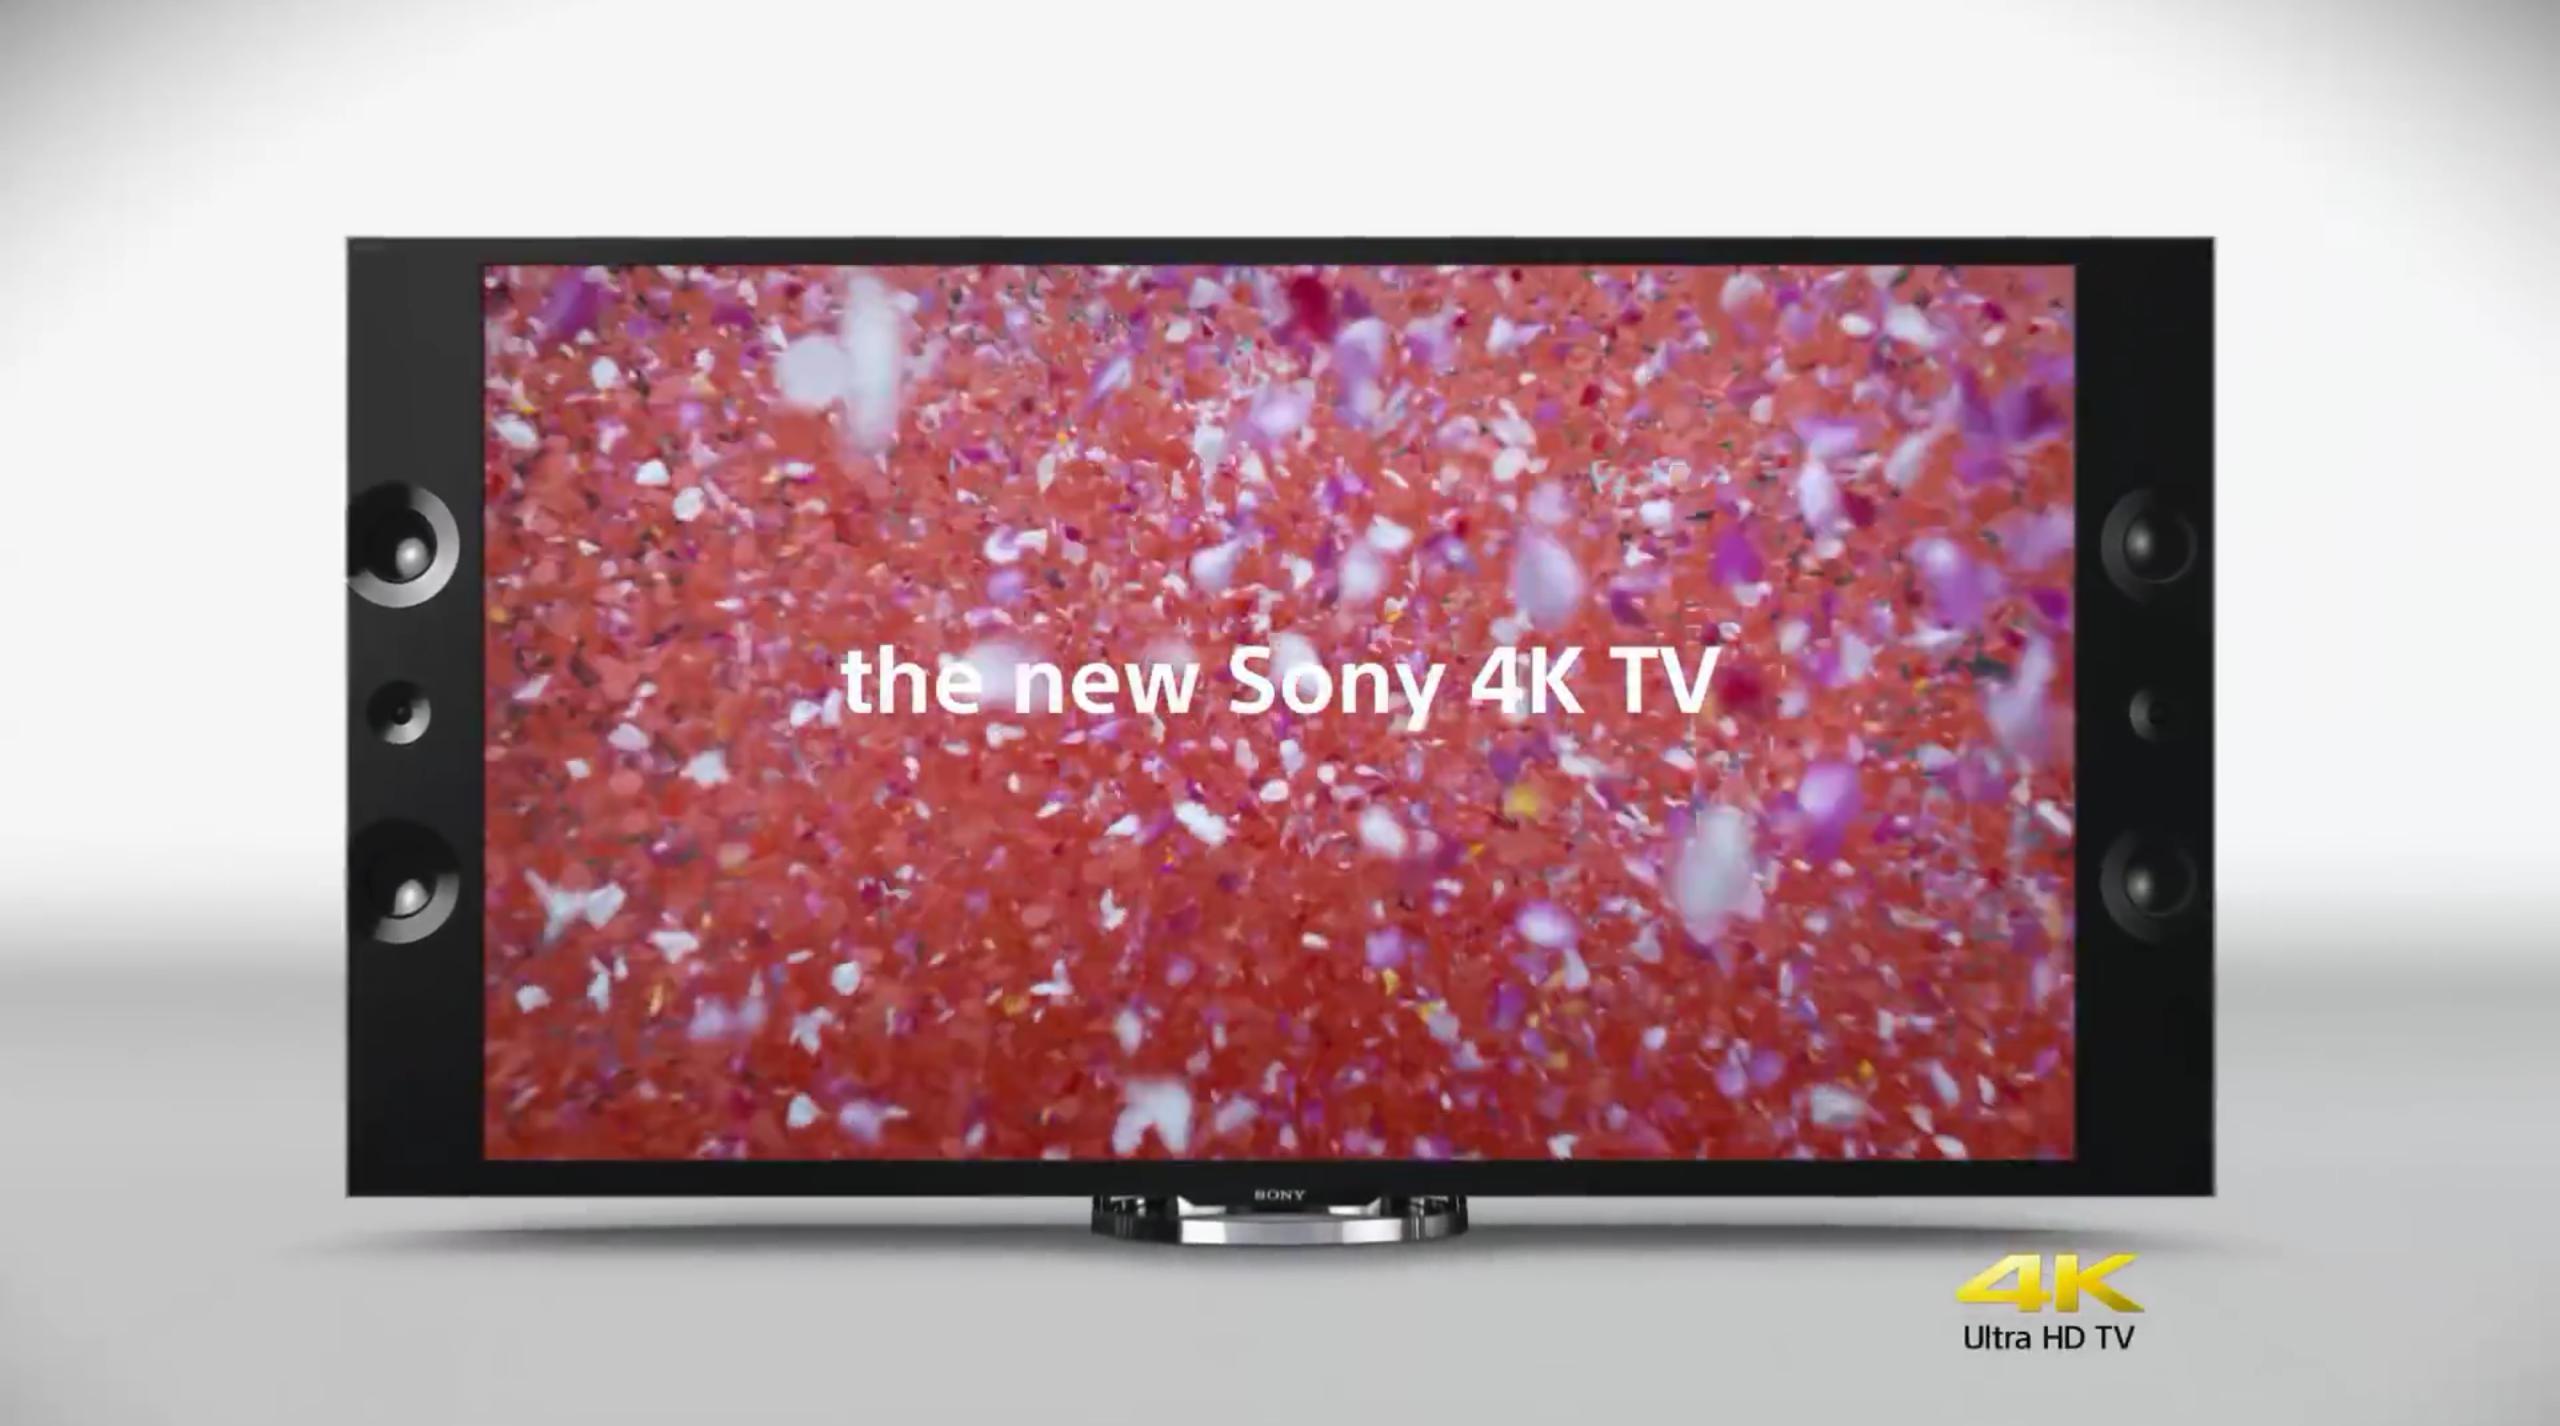 Sony Reinforces Brand Identity With Stunning Flower Petal Ad